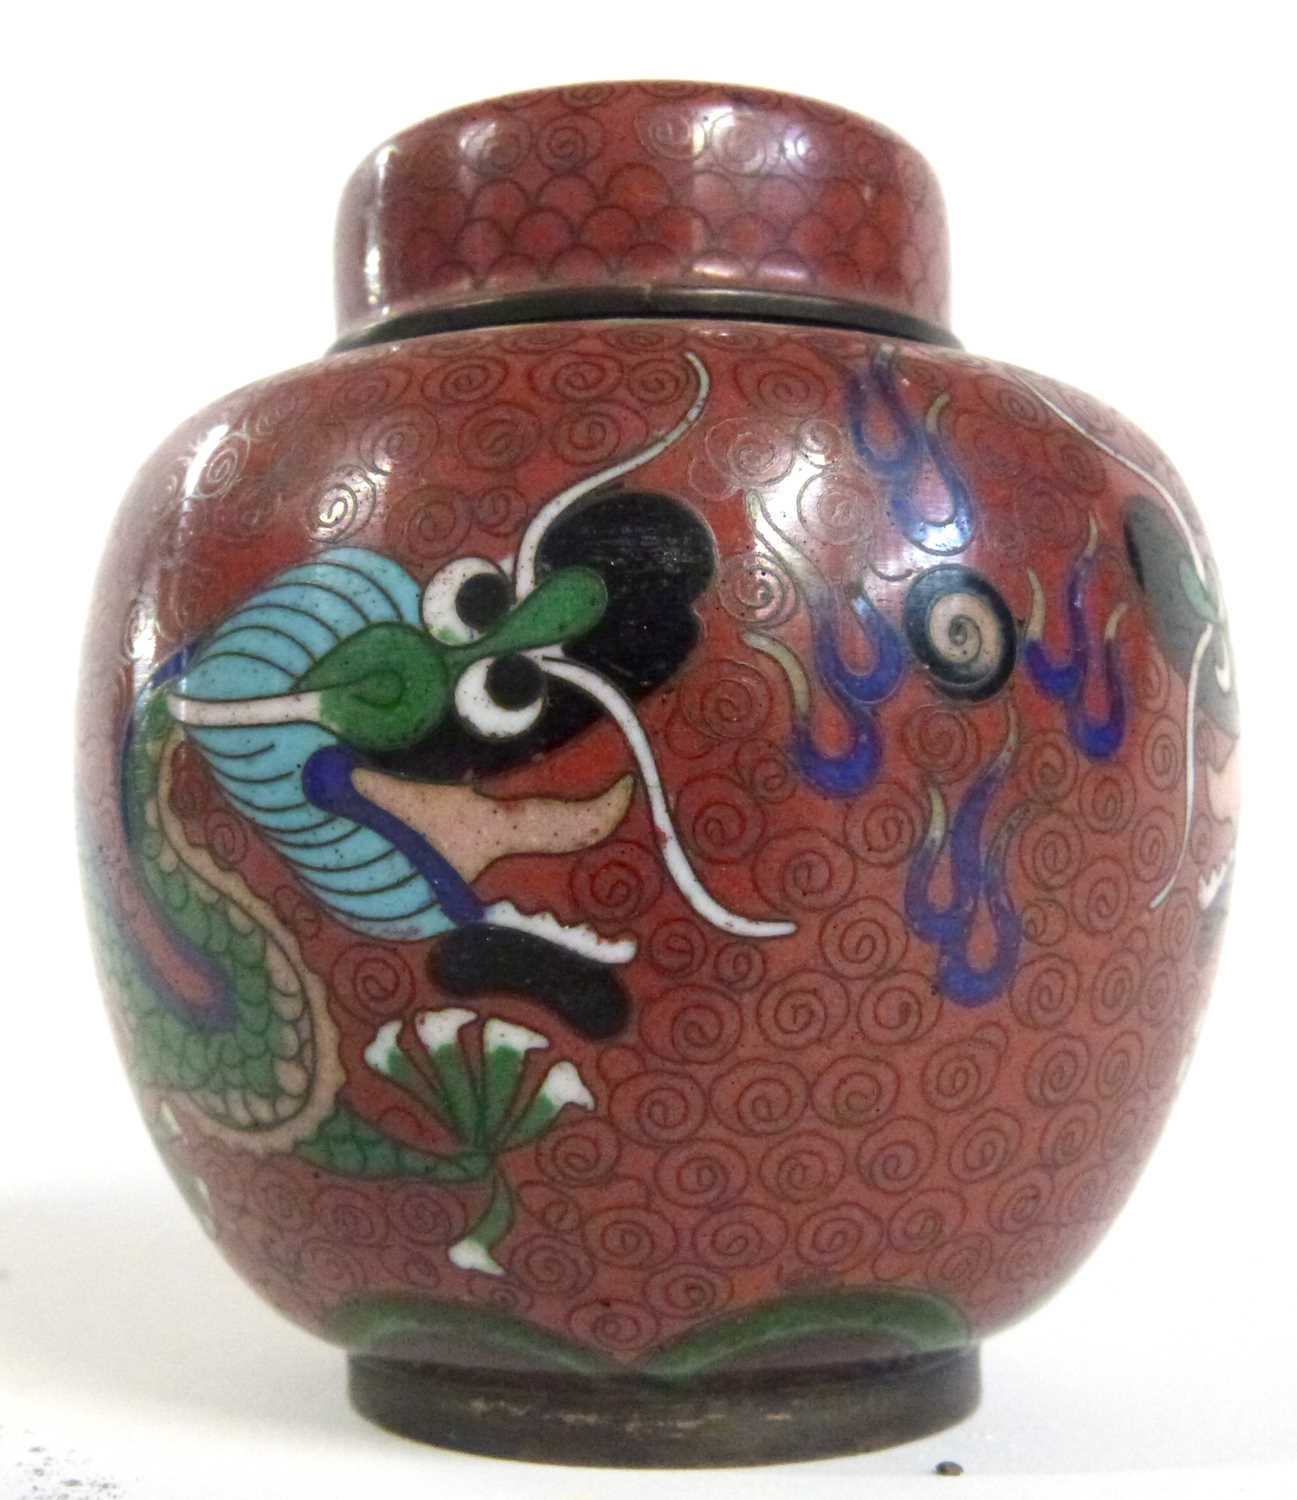 Cloisonne incense burner of globular form with pierced cover together with a small Cloisonne jar and